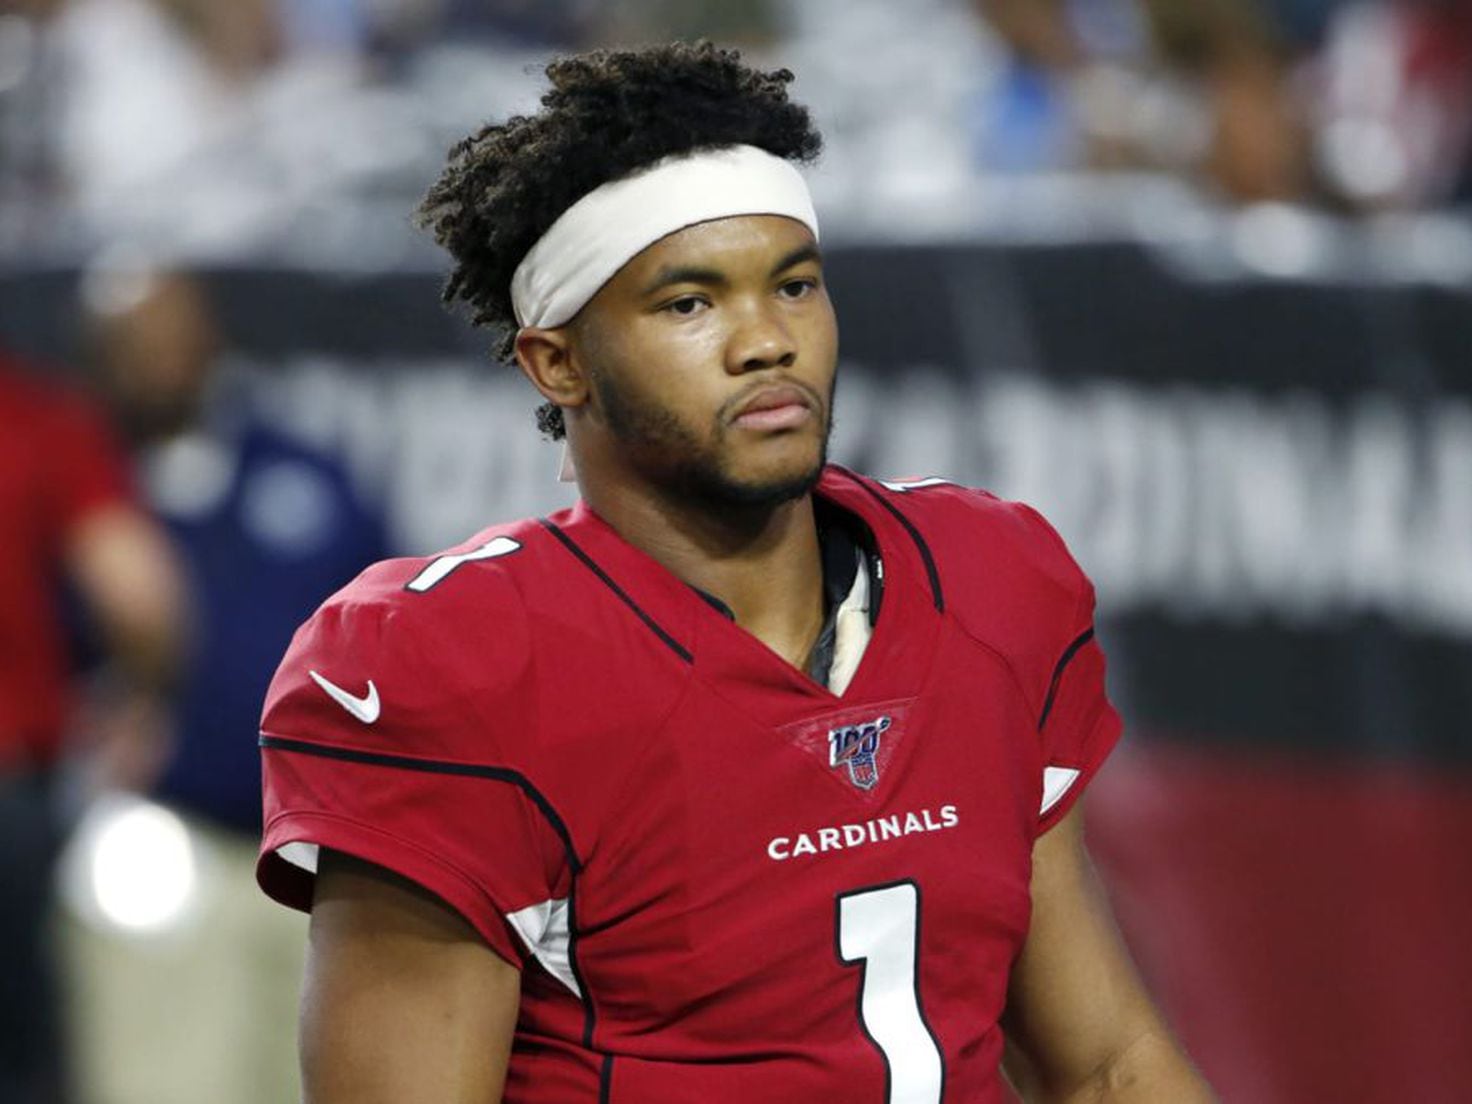 State of the 2021 Arizona Cardinals: Kyler Murray and Co. must